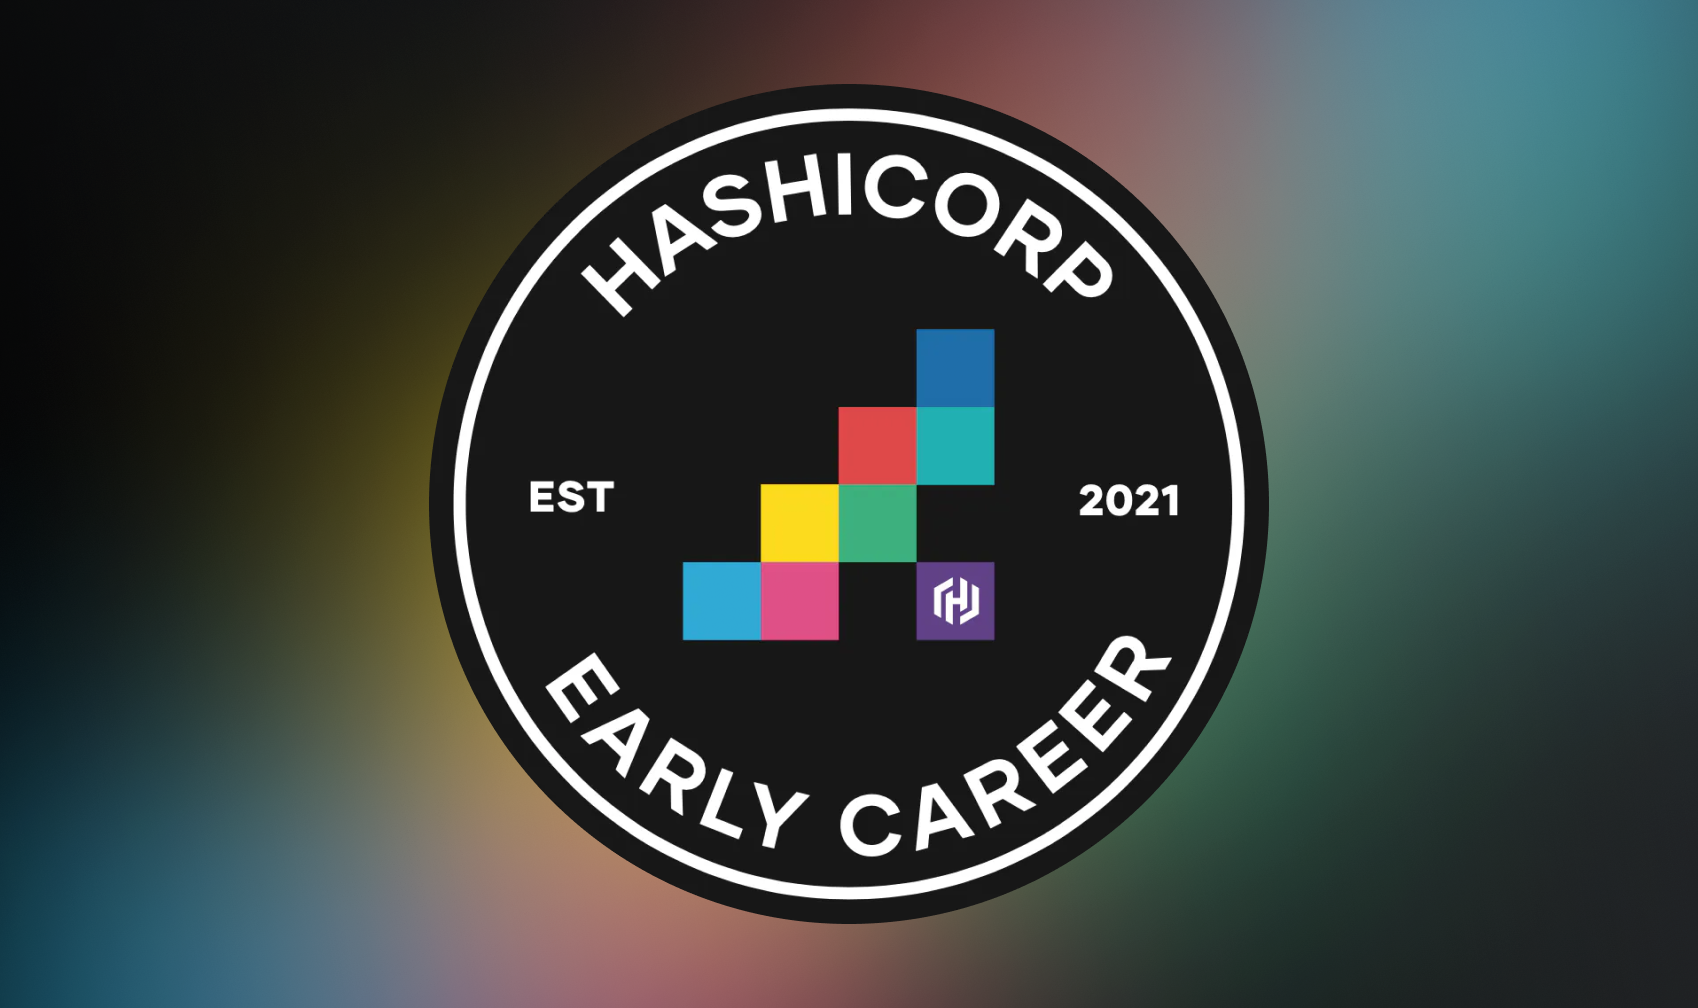 HashiCorp Early Careers: Preparing interns for the real world